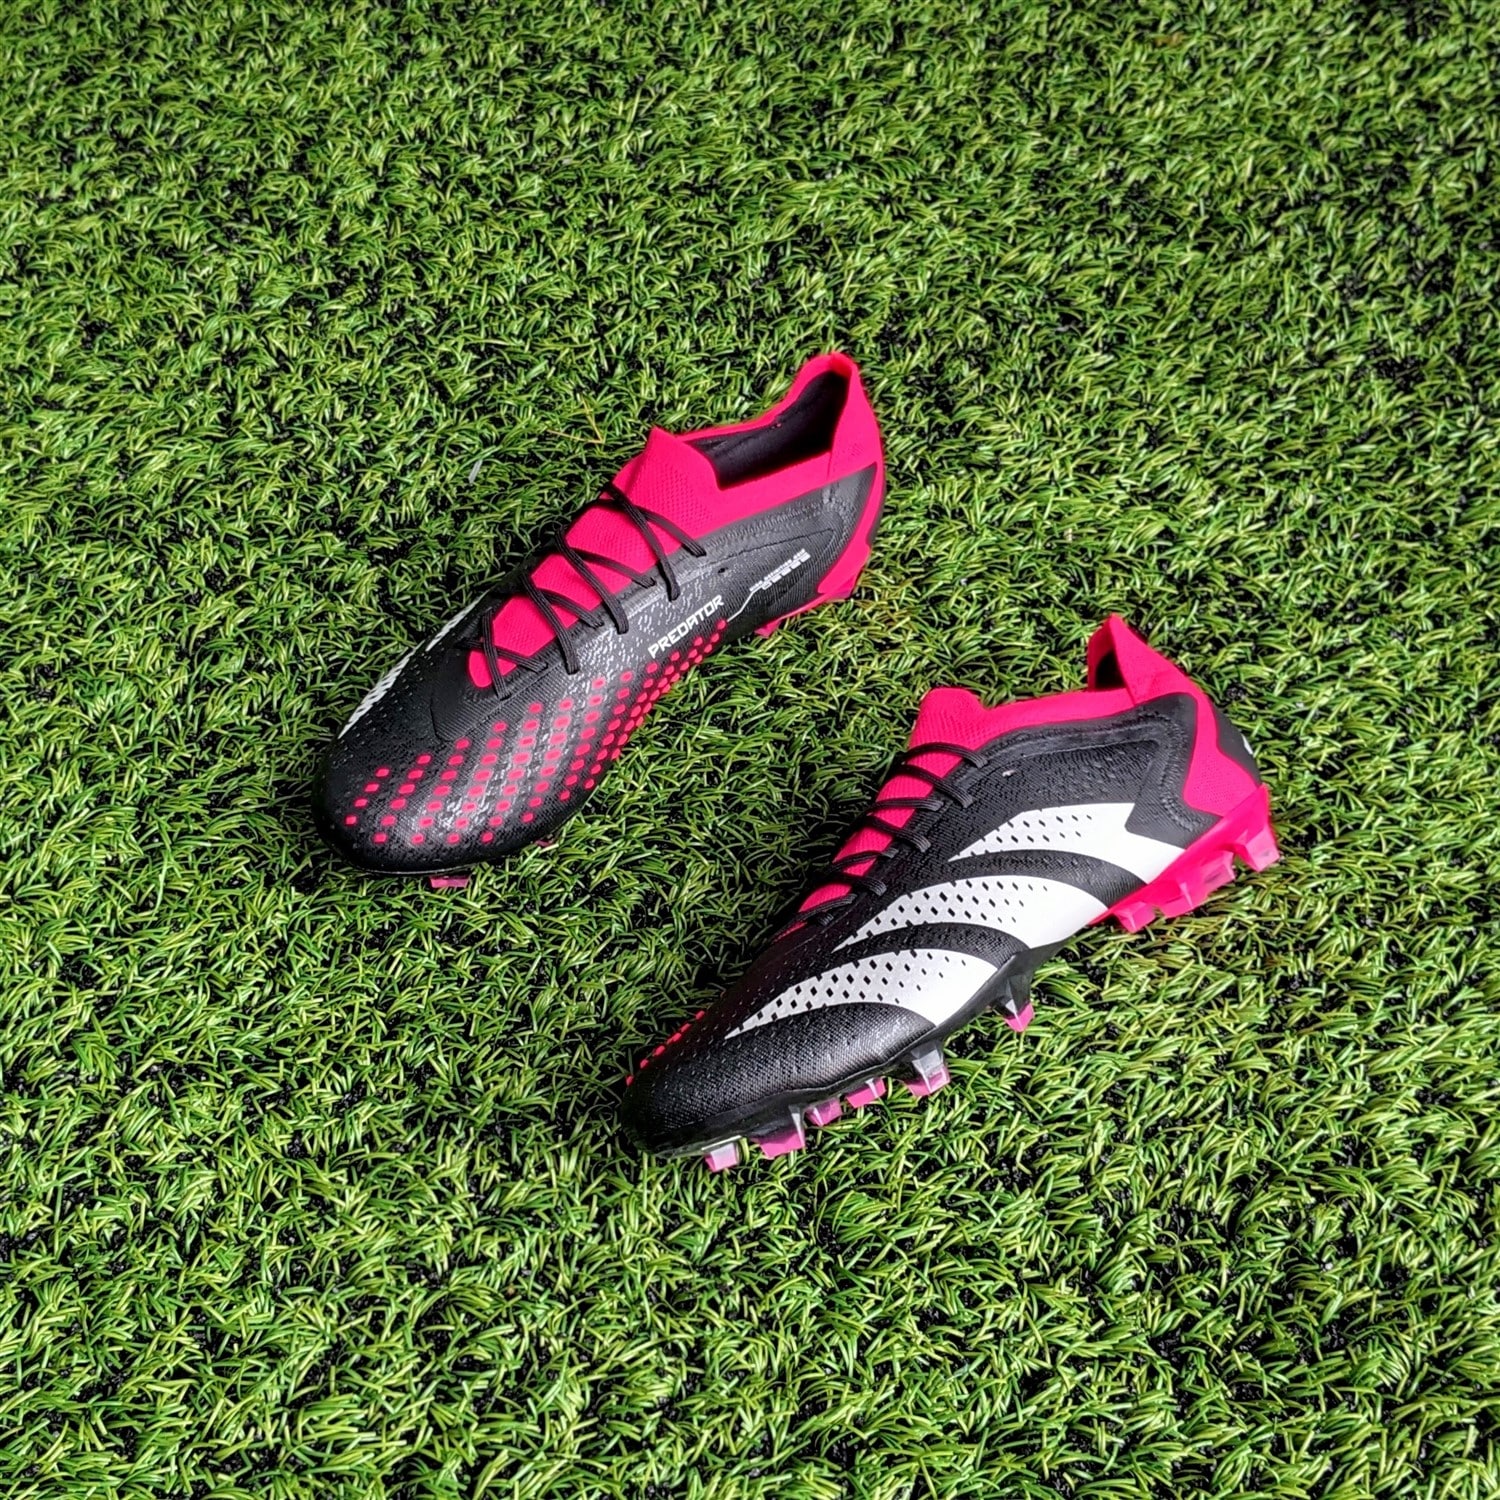 Which adidas Predator Accuracy is right for you? Key Differences